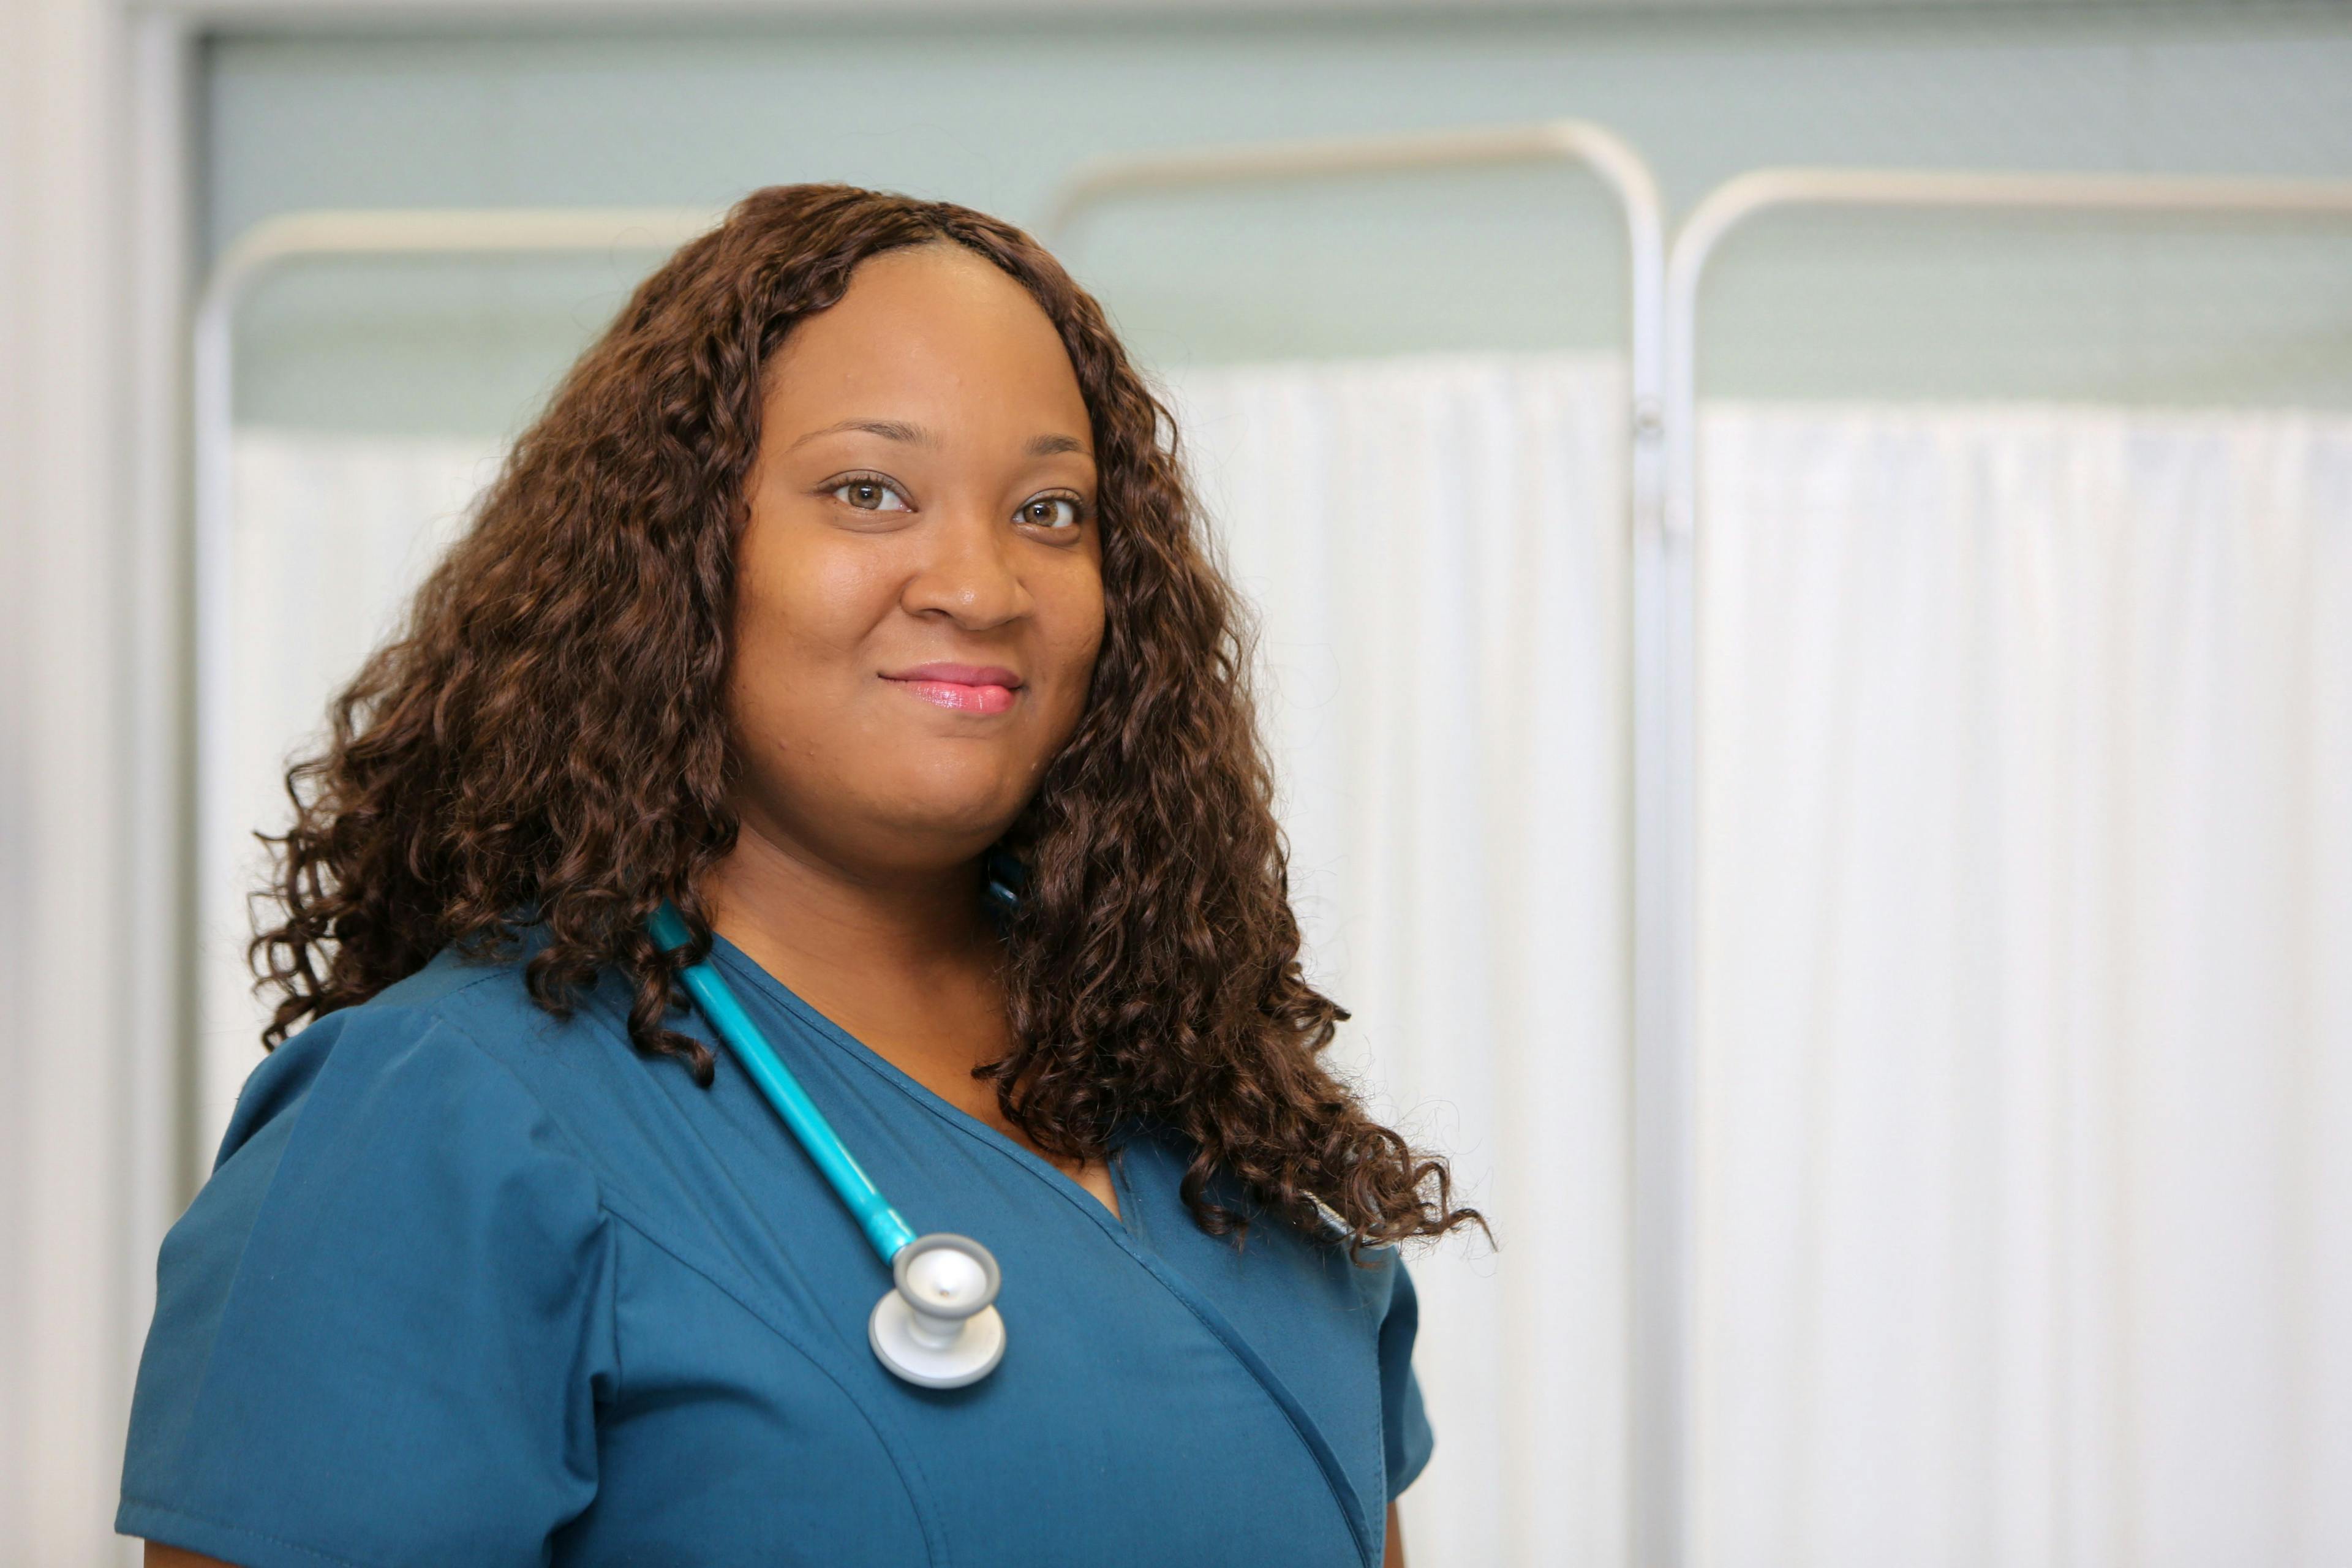 Nursing profession is ‘steeped in racism’